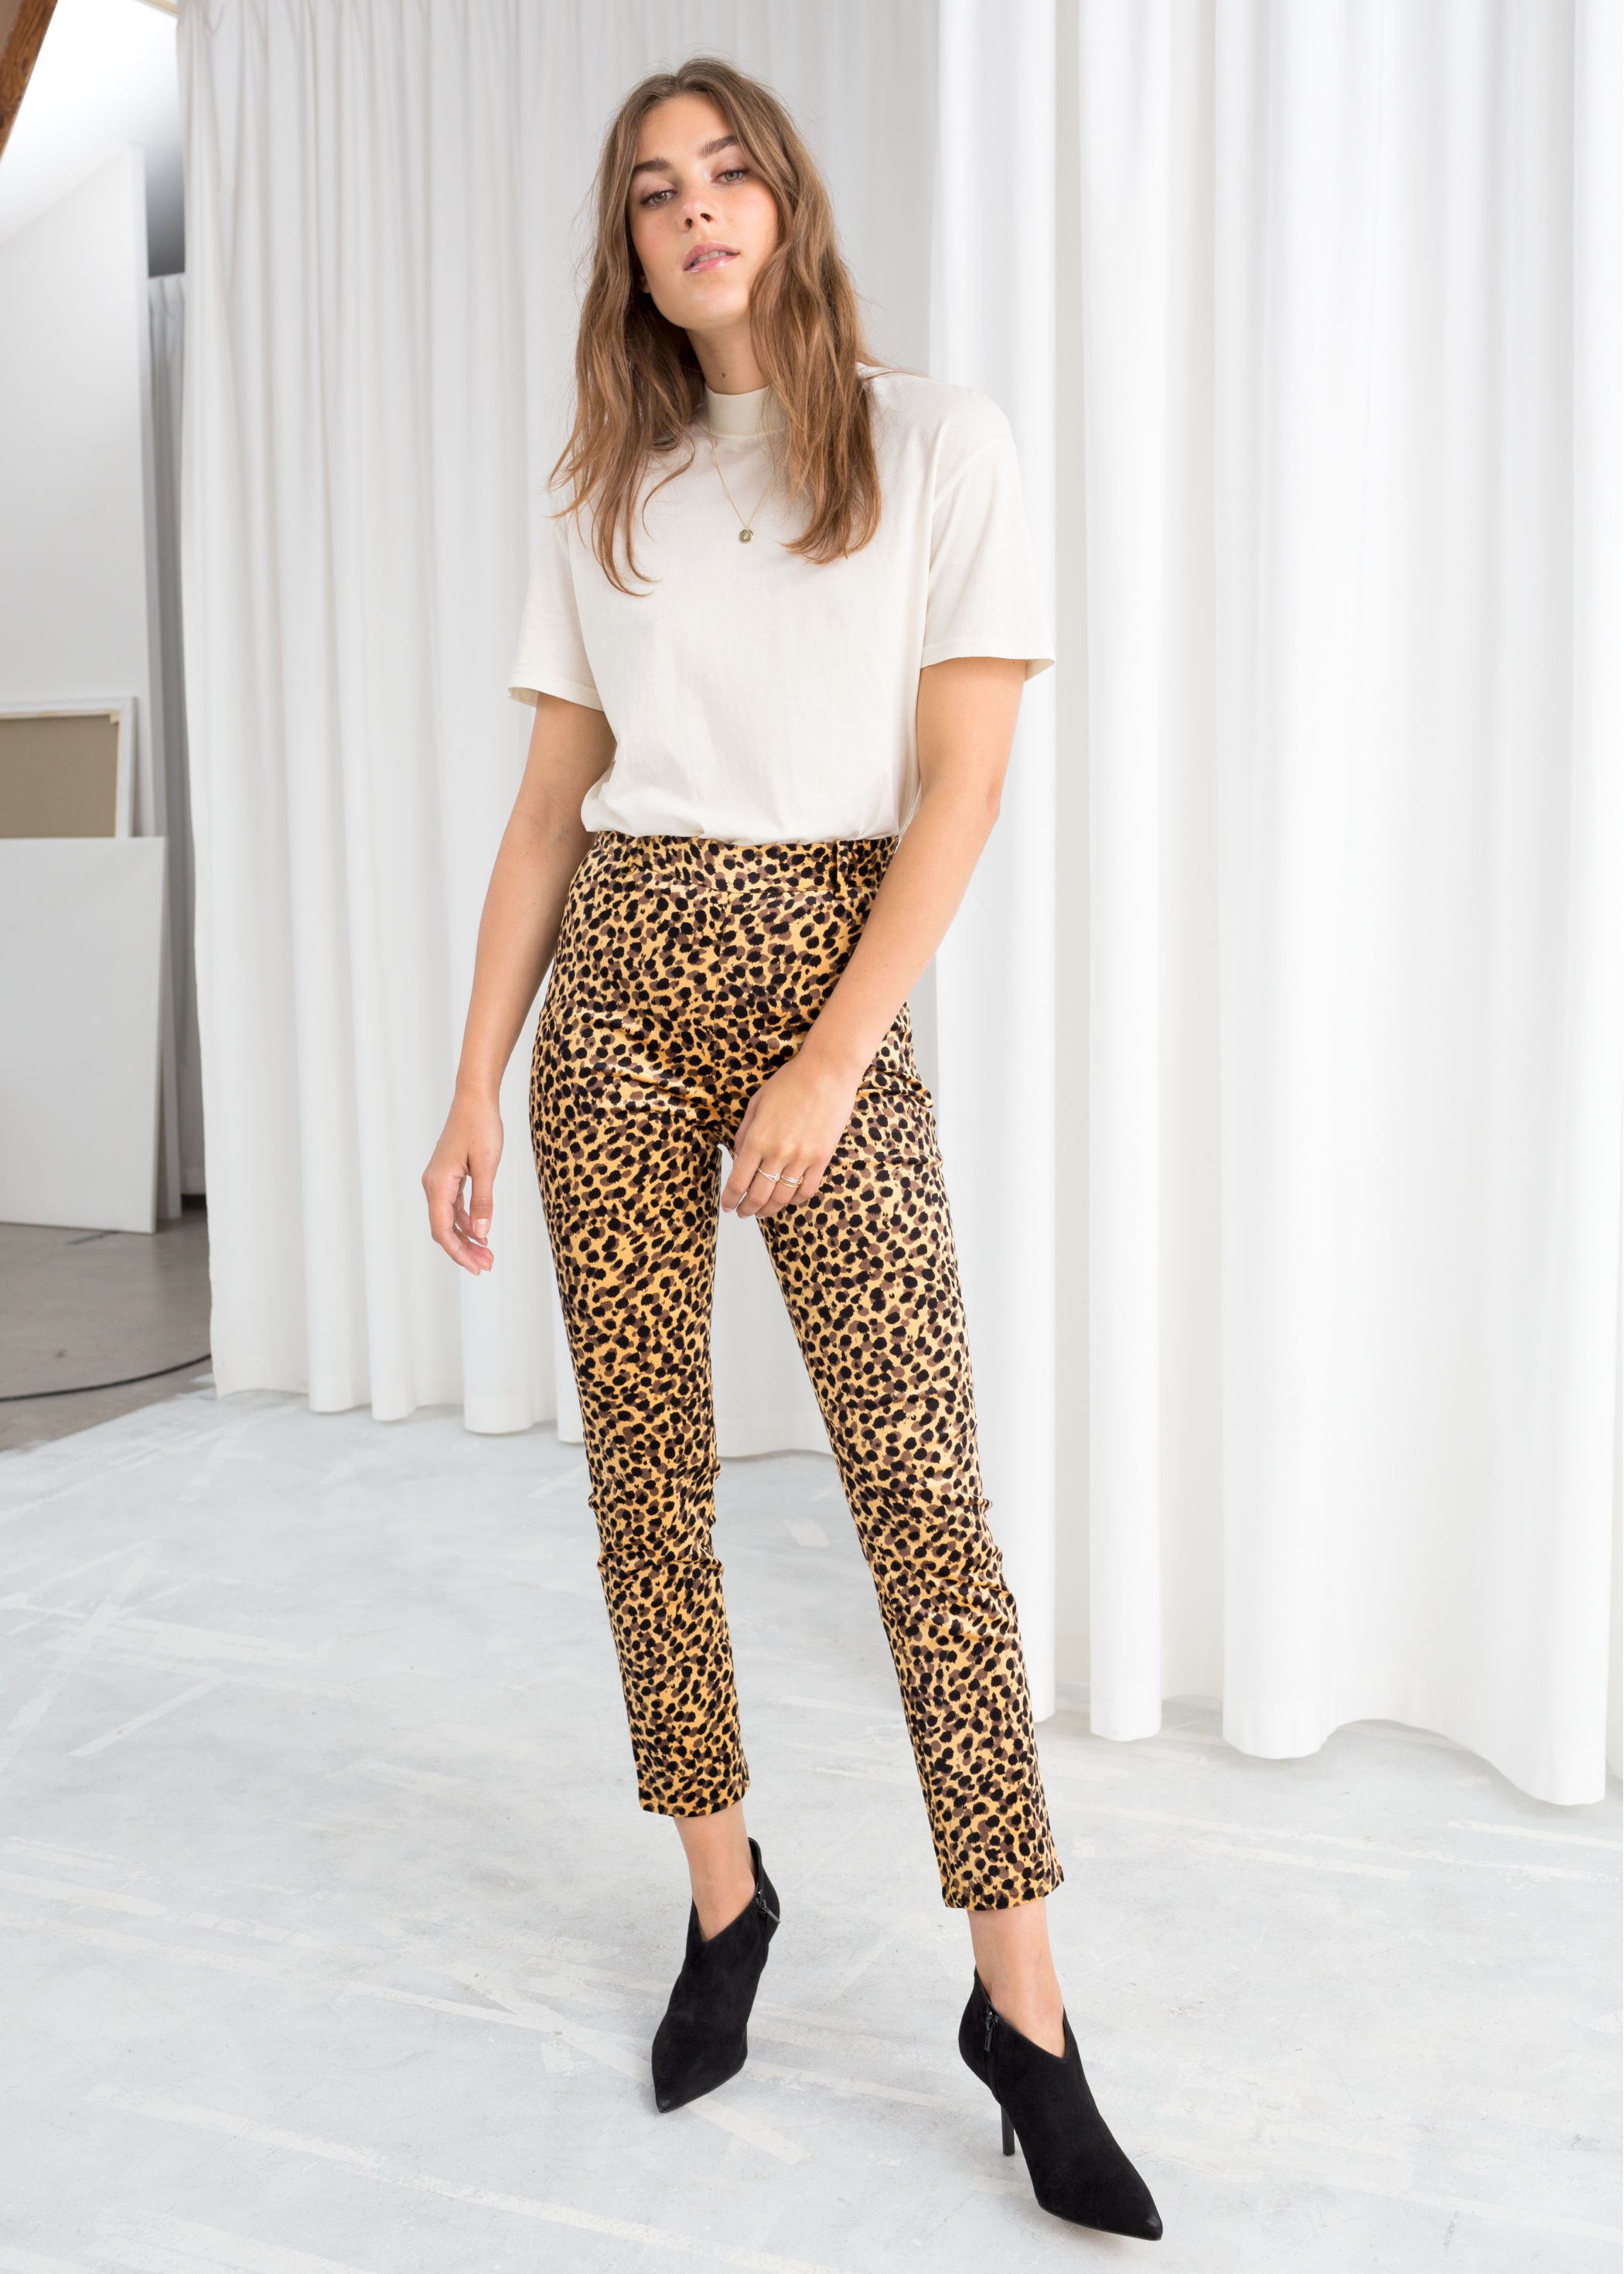 & Other Stories Corduroy Leopard Print Trousers